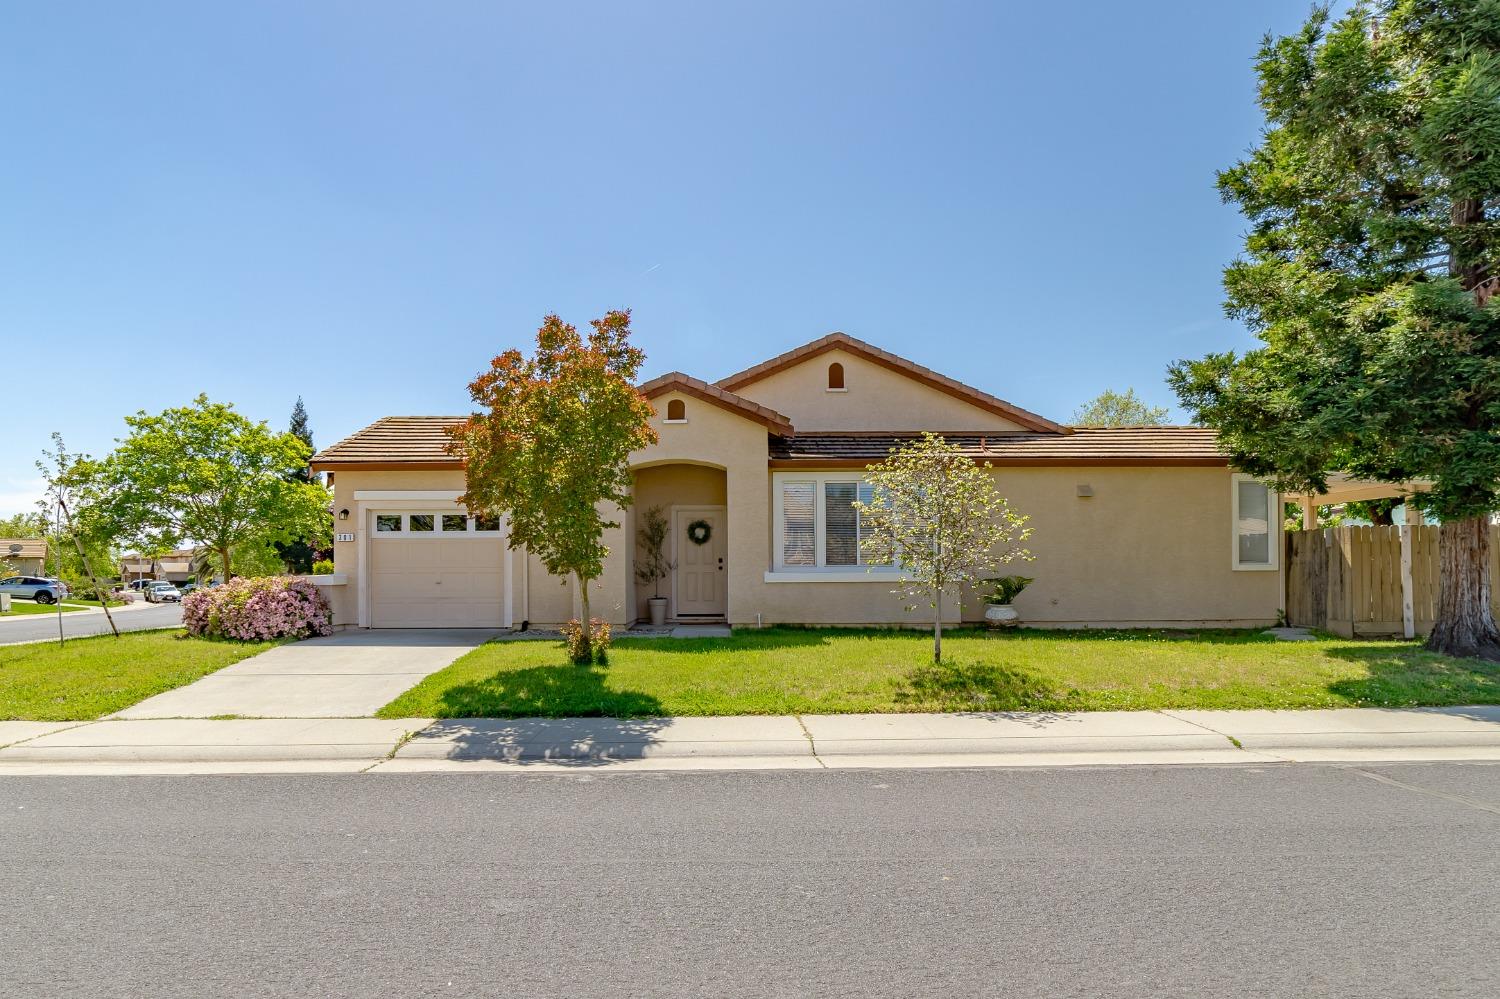 Photo of 301 Perth Ct in Roseville, CA